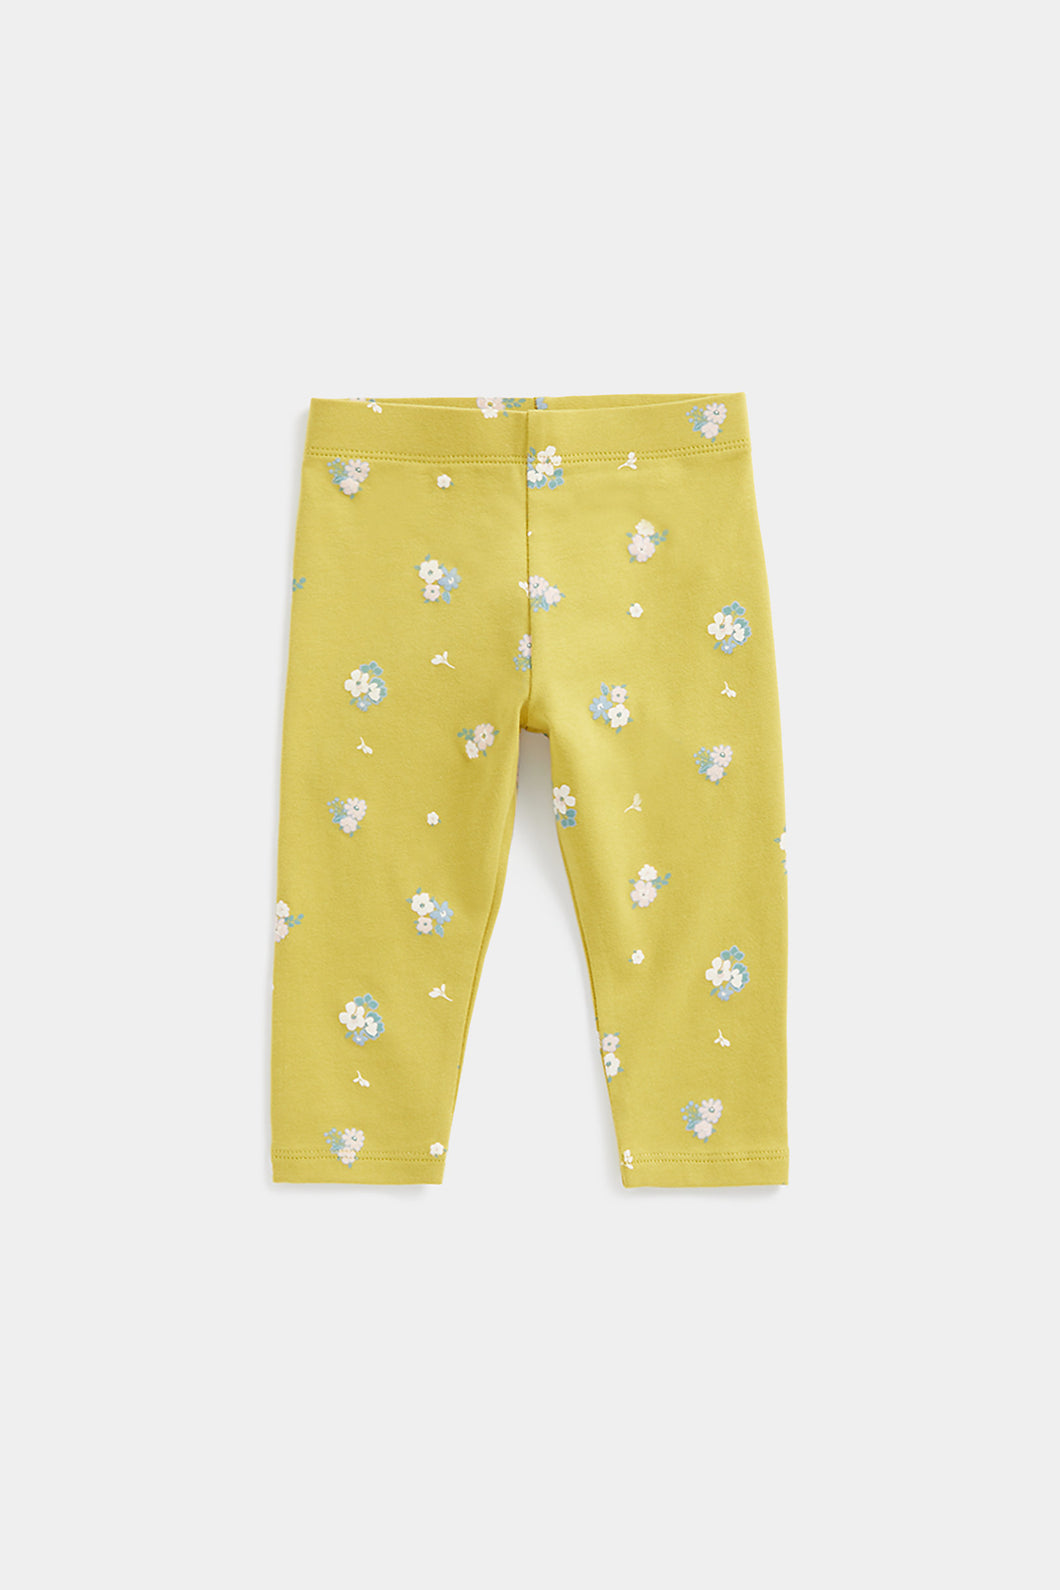 Mothercare Yellow Floral Leggings